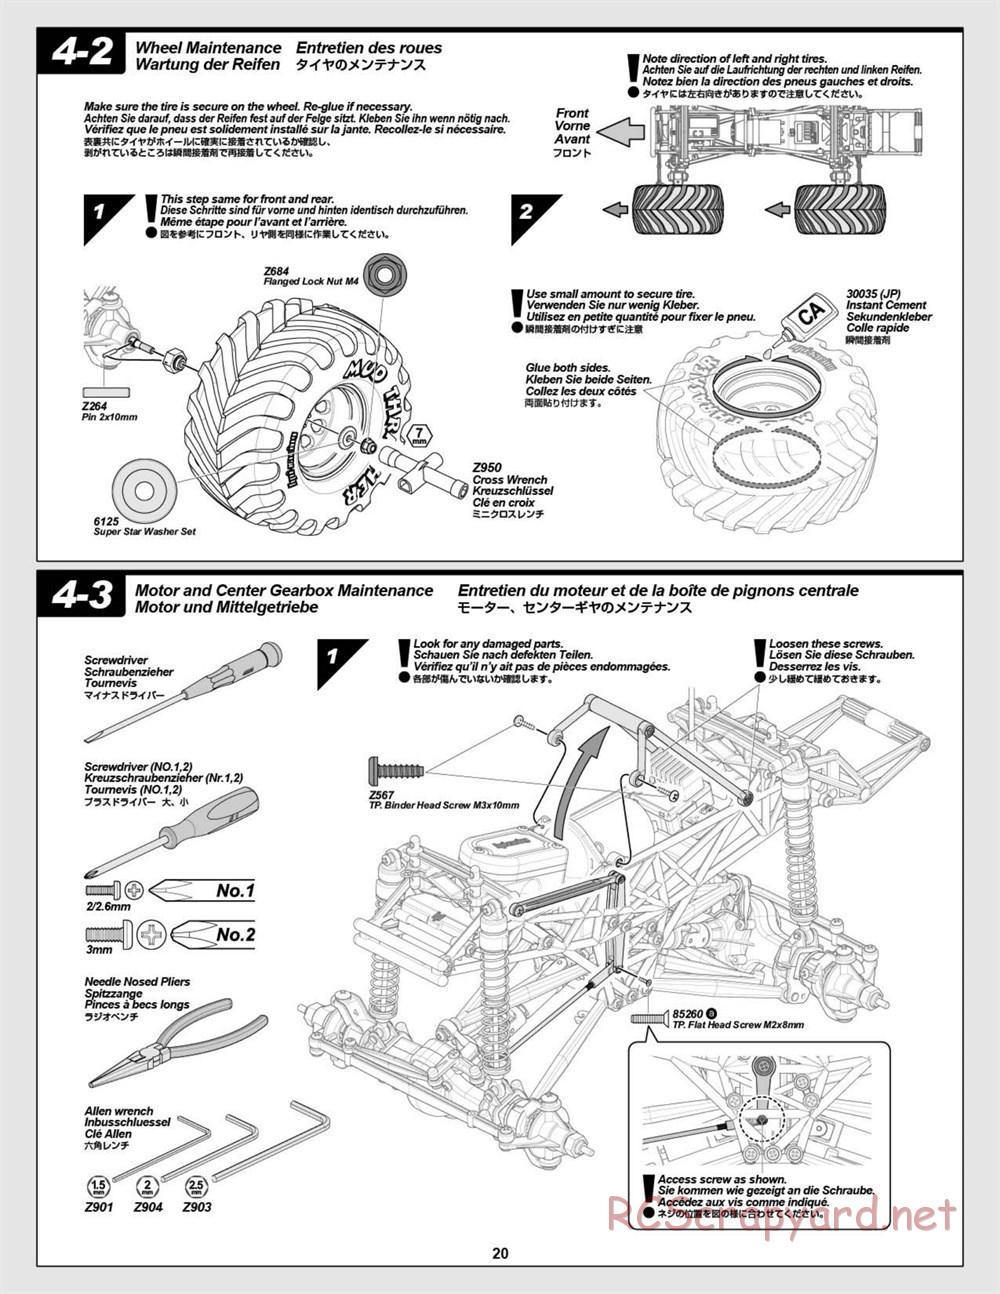 HPI - Wheely King 4x4 - Manual - Page 20